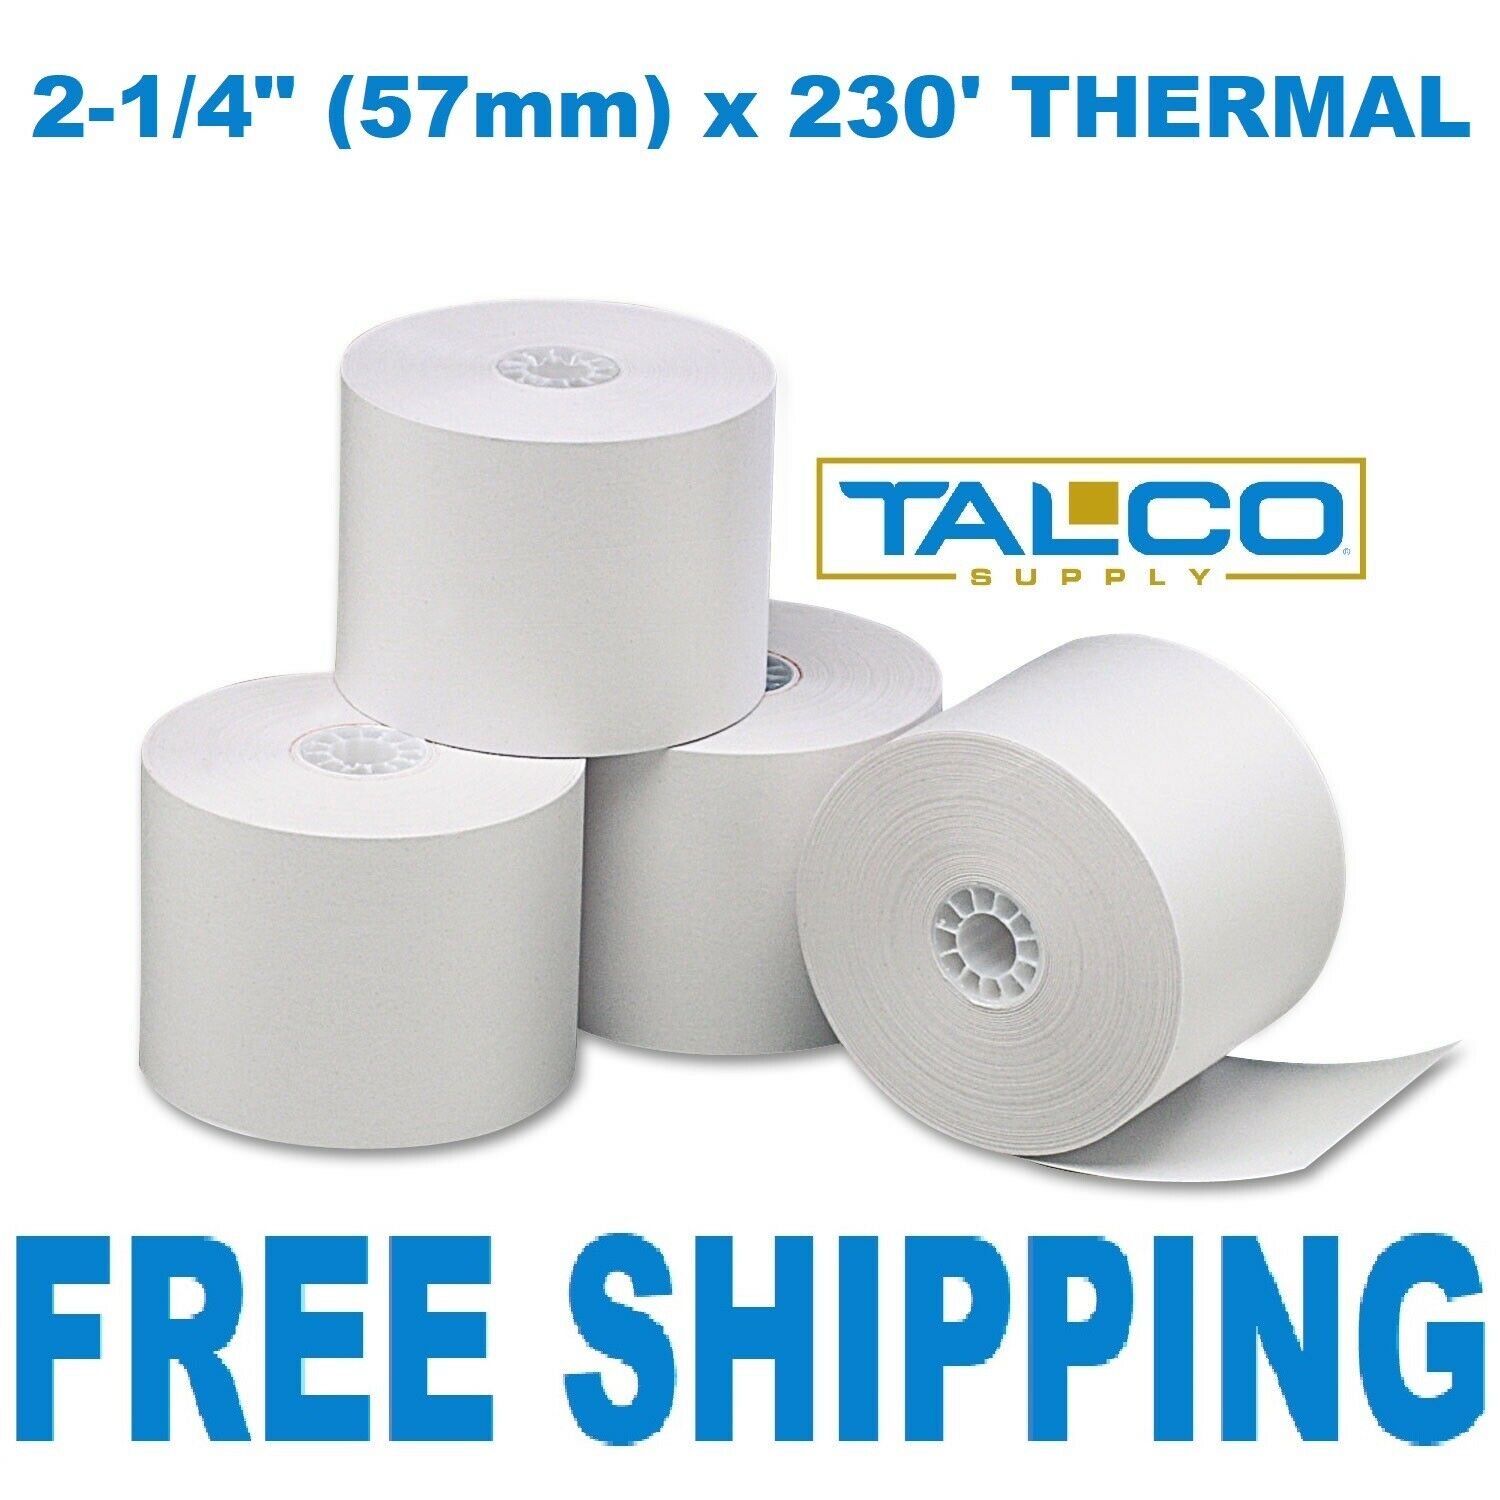 (50) 2-1/4" X 230' Thermal Cash Register Paper Rolls ~fast Free Shipping~